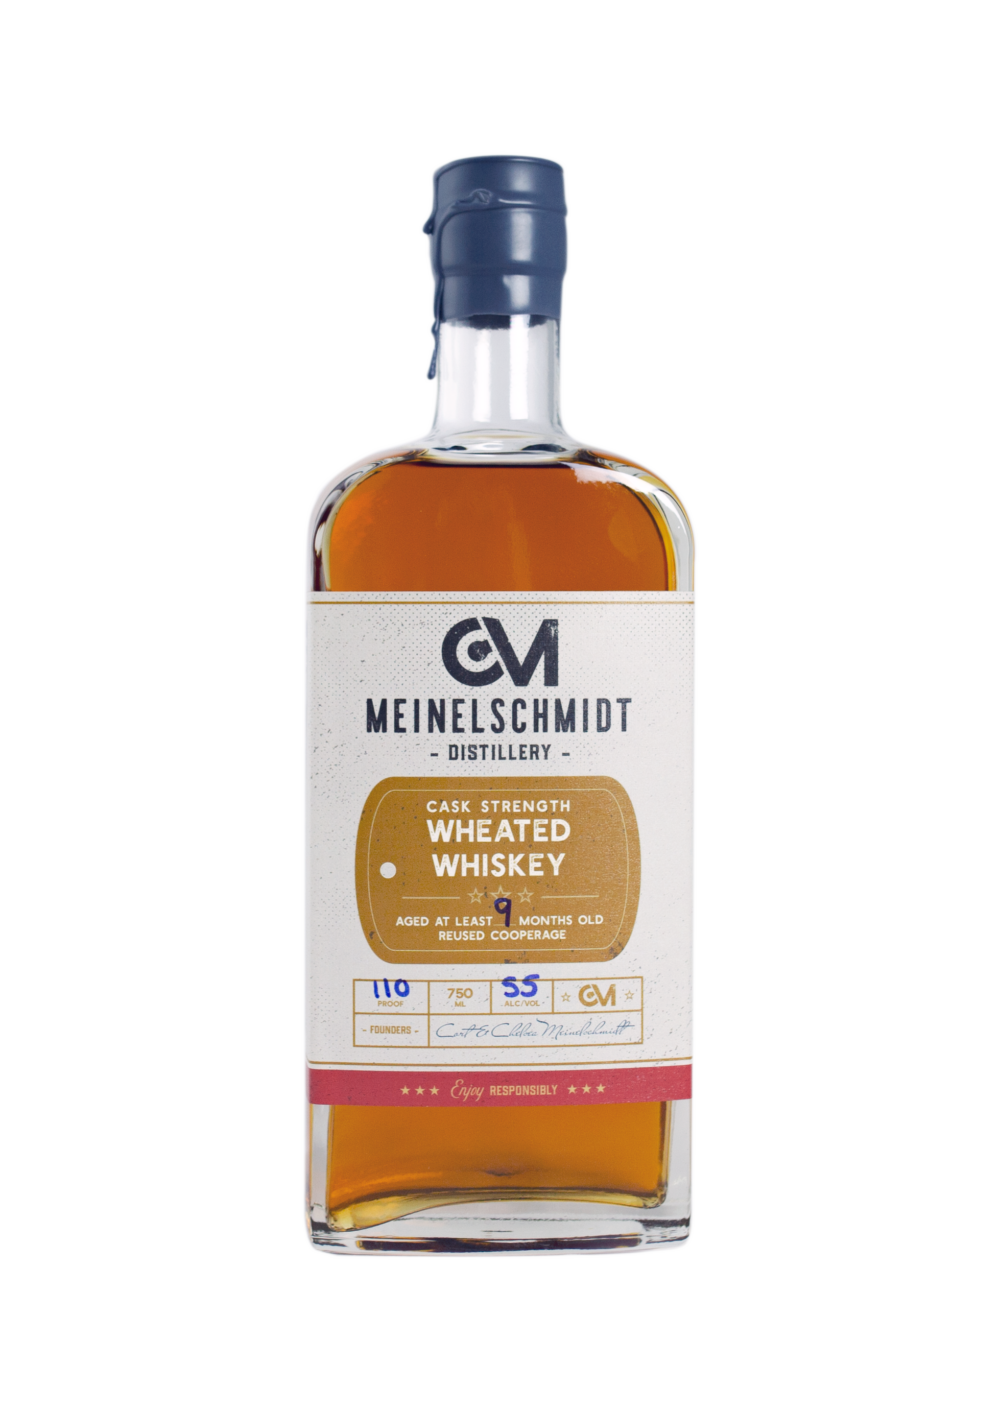 Cask Strength Wheated Whiskey